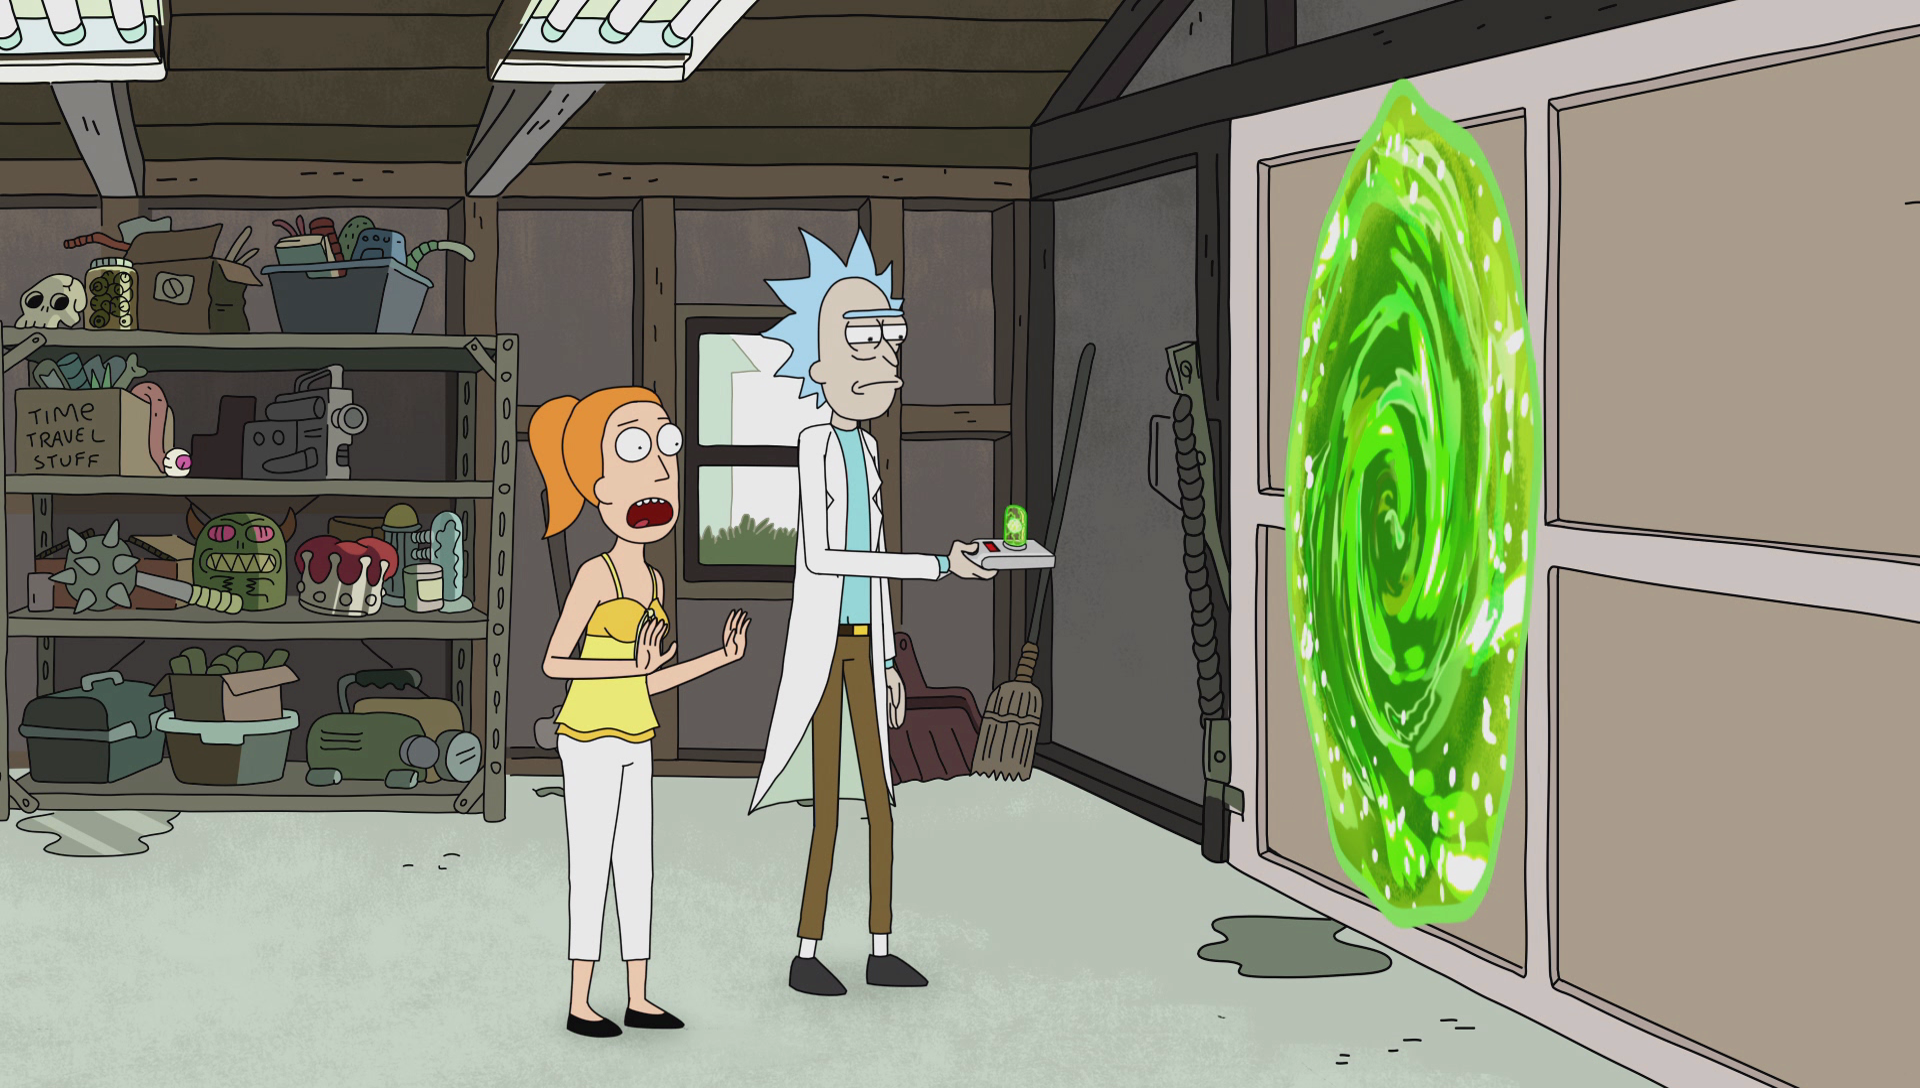 Image S1e7 portal gun.png Rick and Morty Wiki FANDOM powered by Wikia